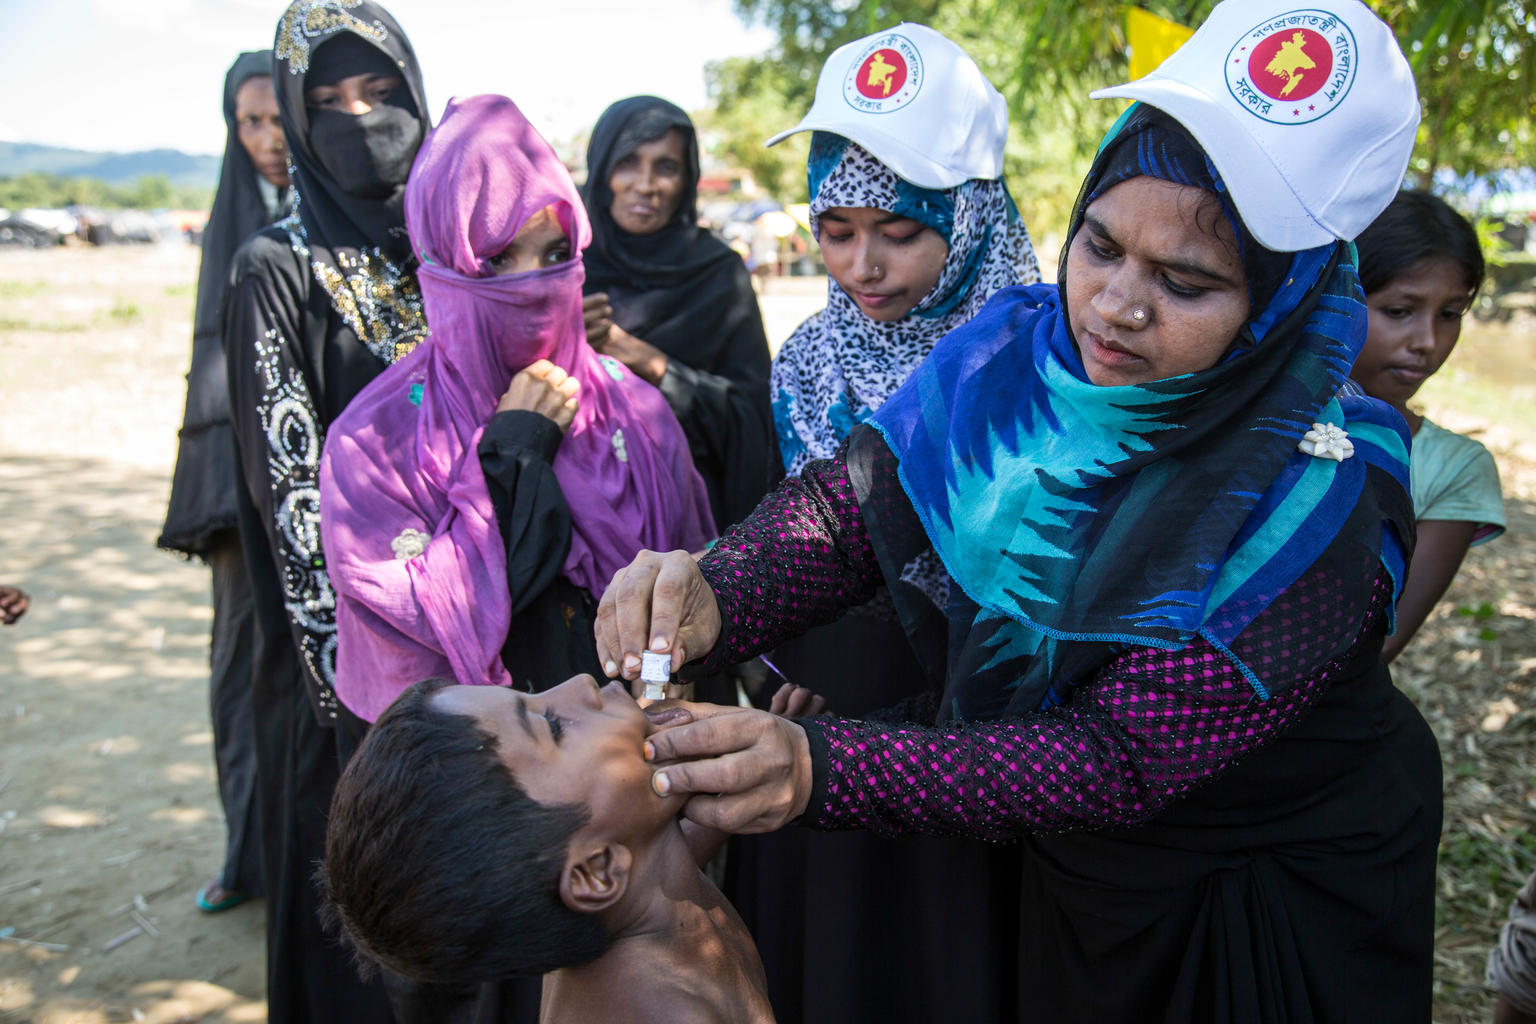 A Rohingya refugee receives a dose of an oral cholera vaccine at a makeshift refugee settlement in Bangladesh. Photo credit: UNICEF / Roger LeMoyne